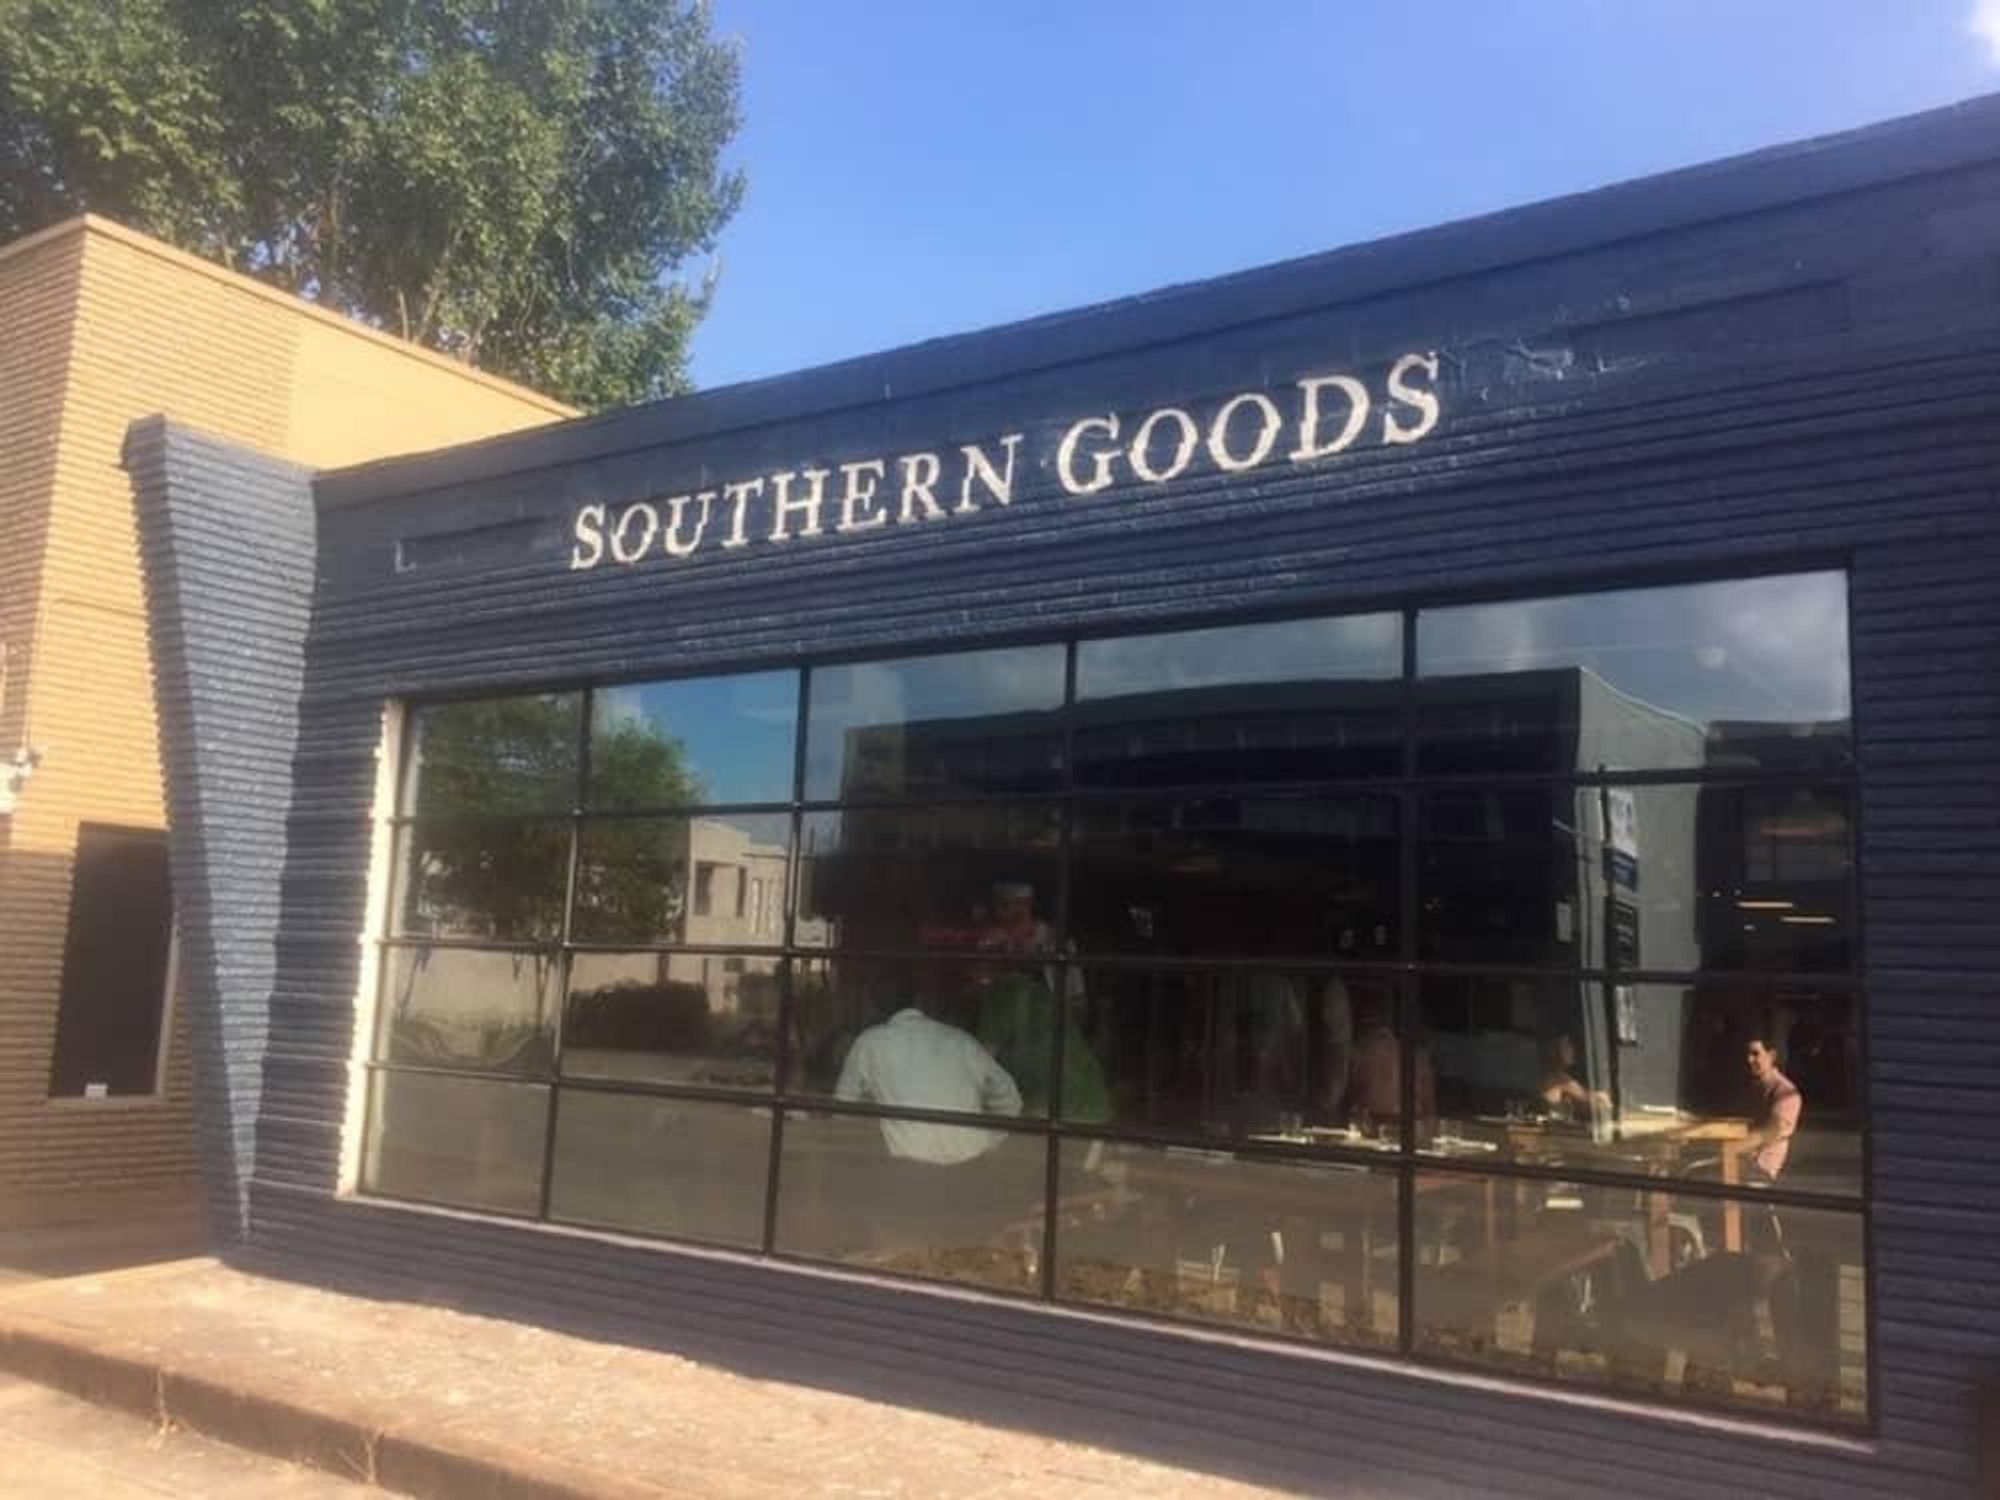 Southern Goods exterior